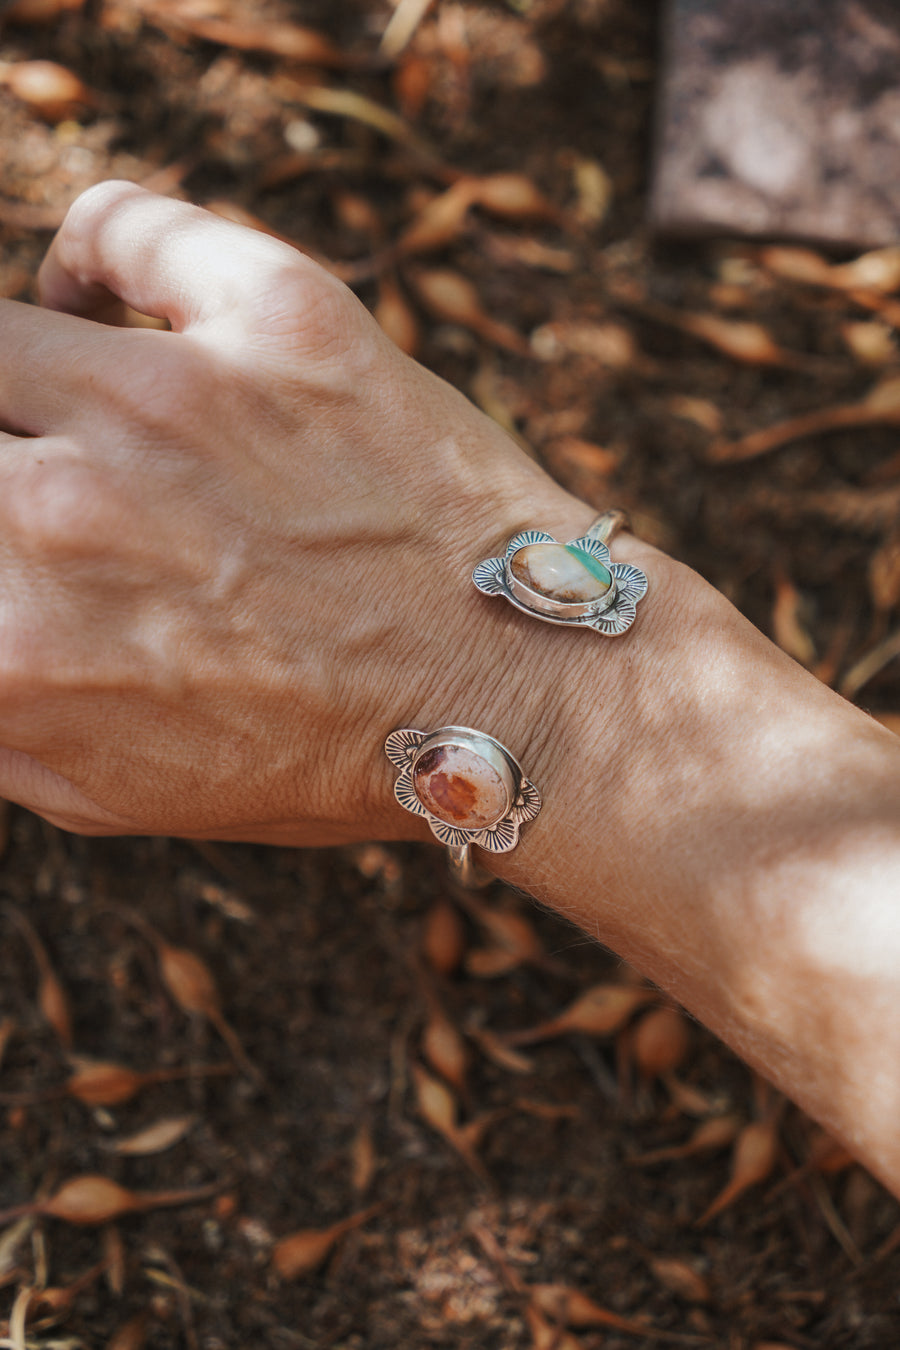 The Canyon Wrap Cuff in Mexican Fire Opal & Royston Ribbon